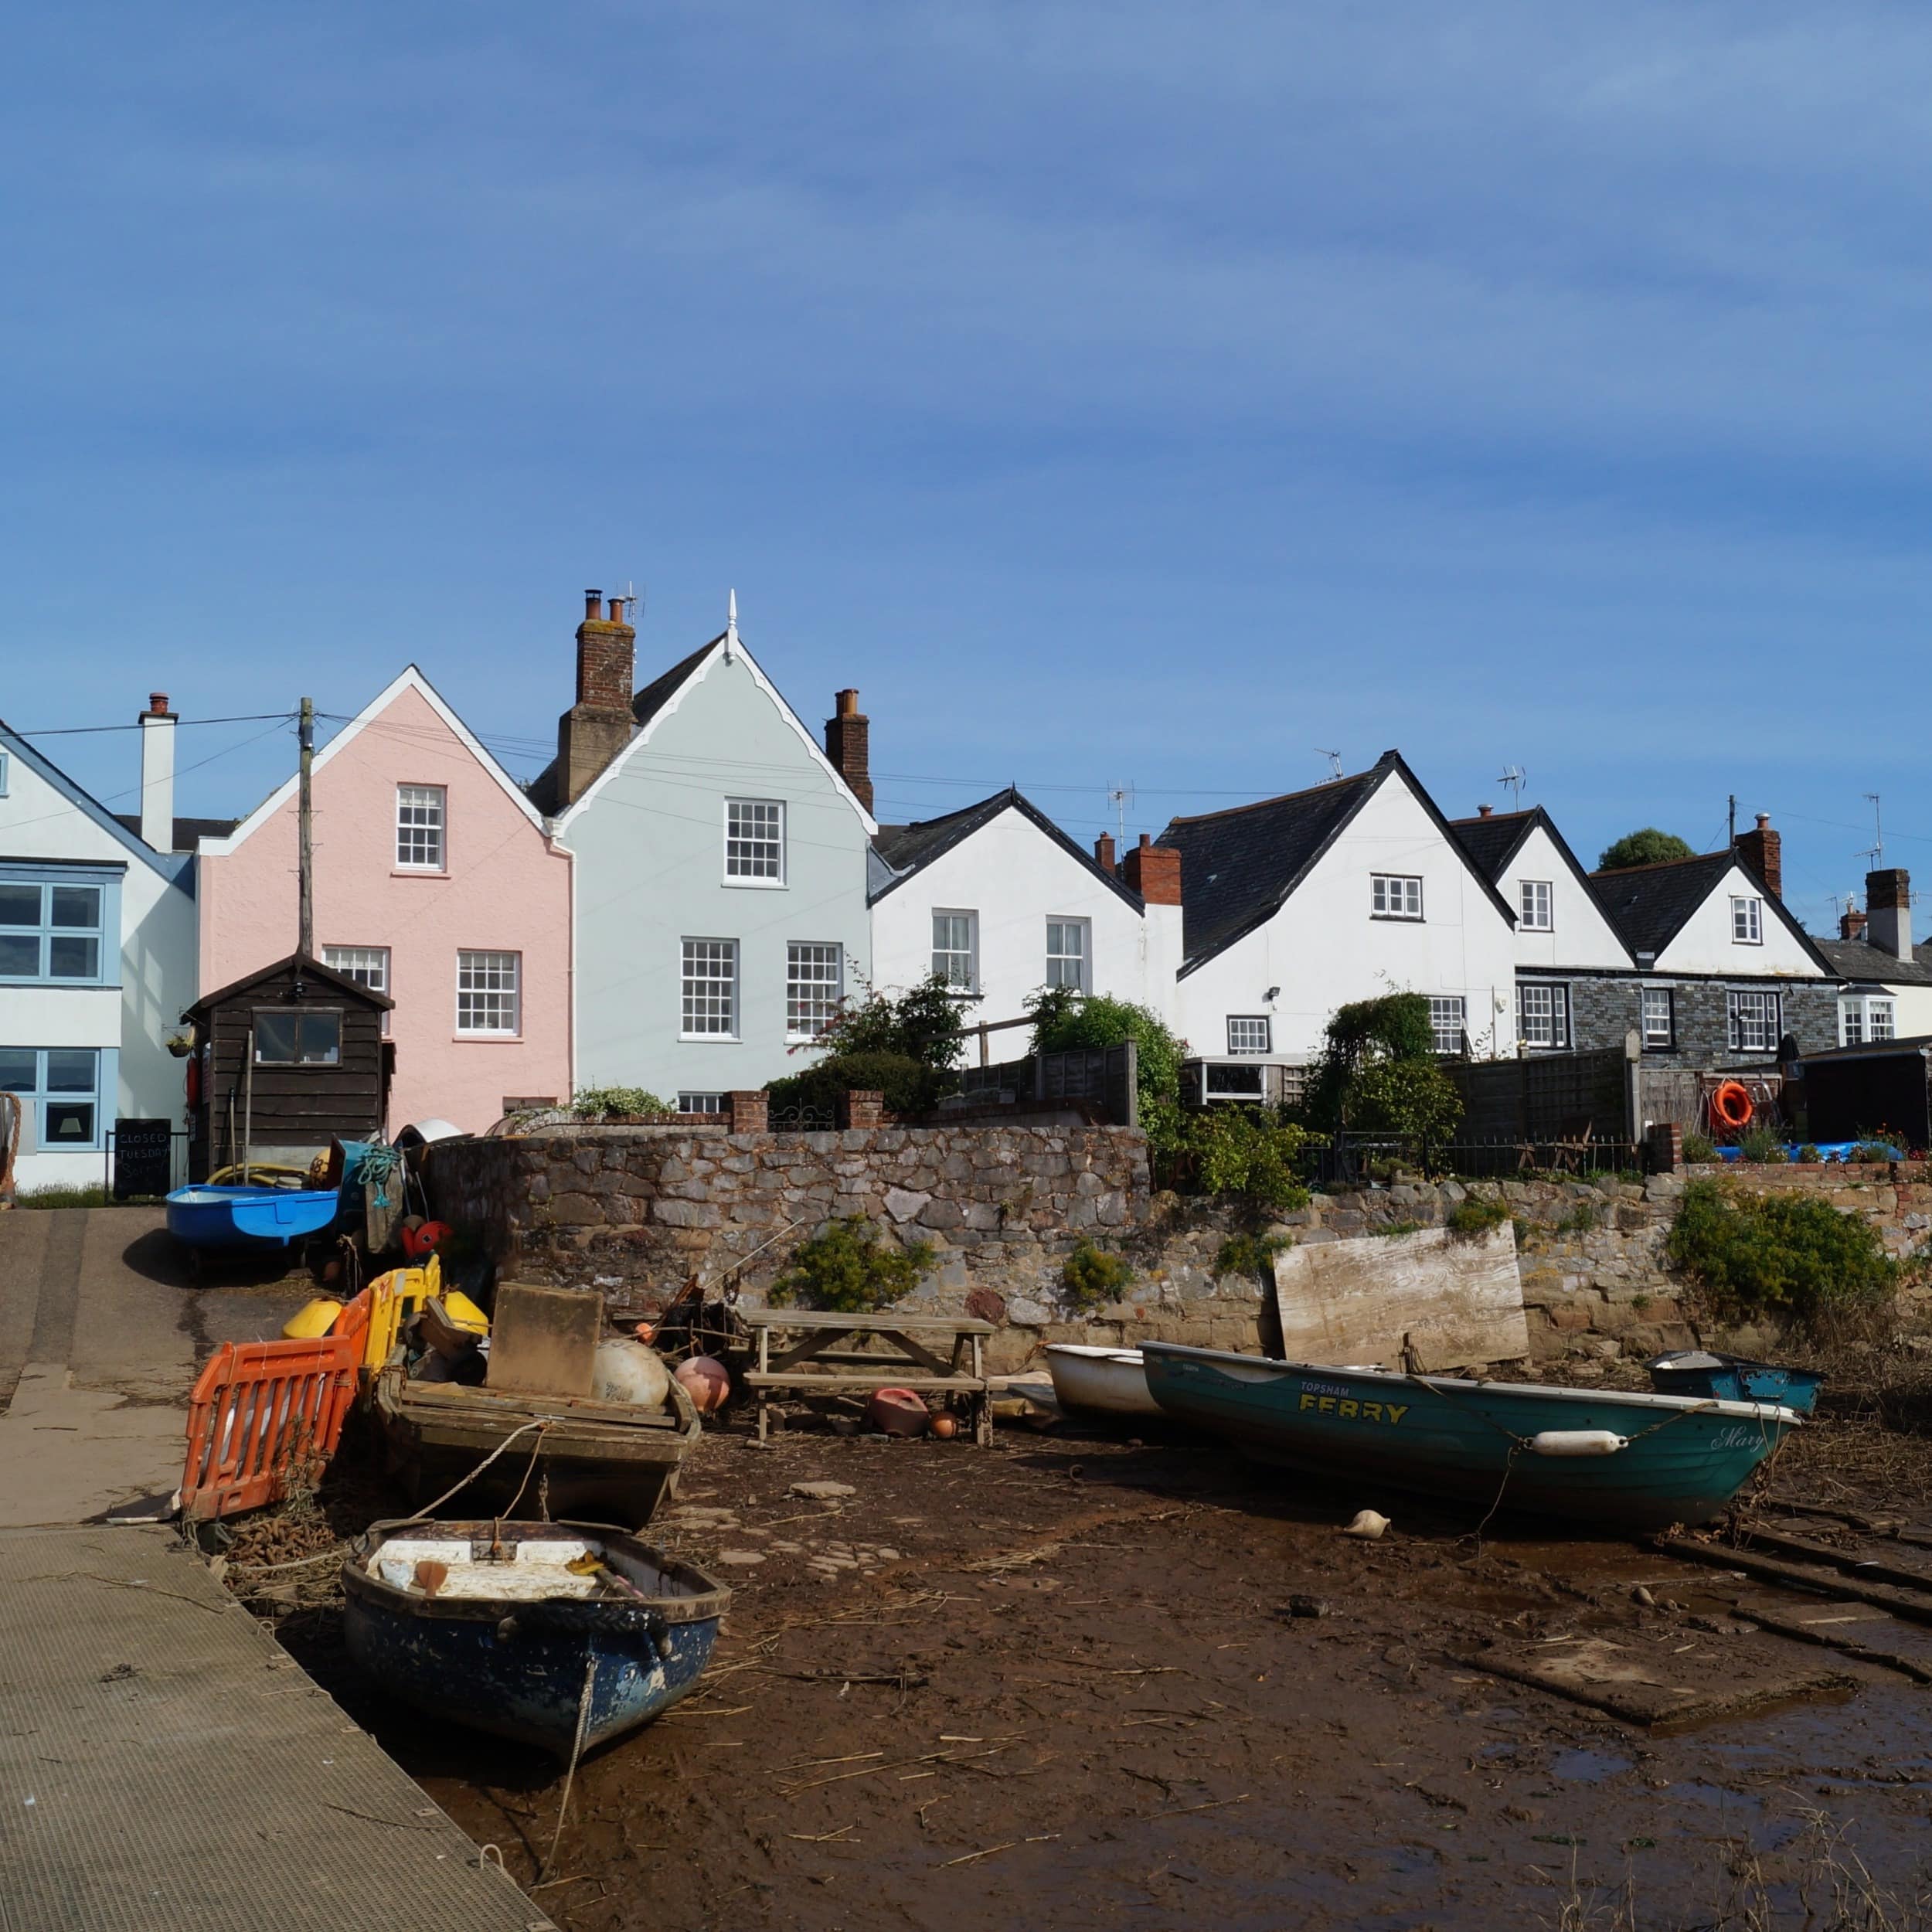 A line of charming cottages by the sea